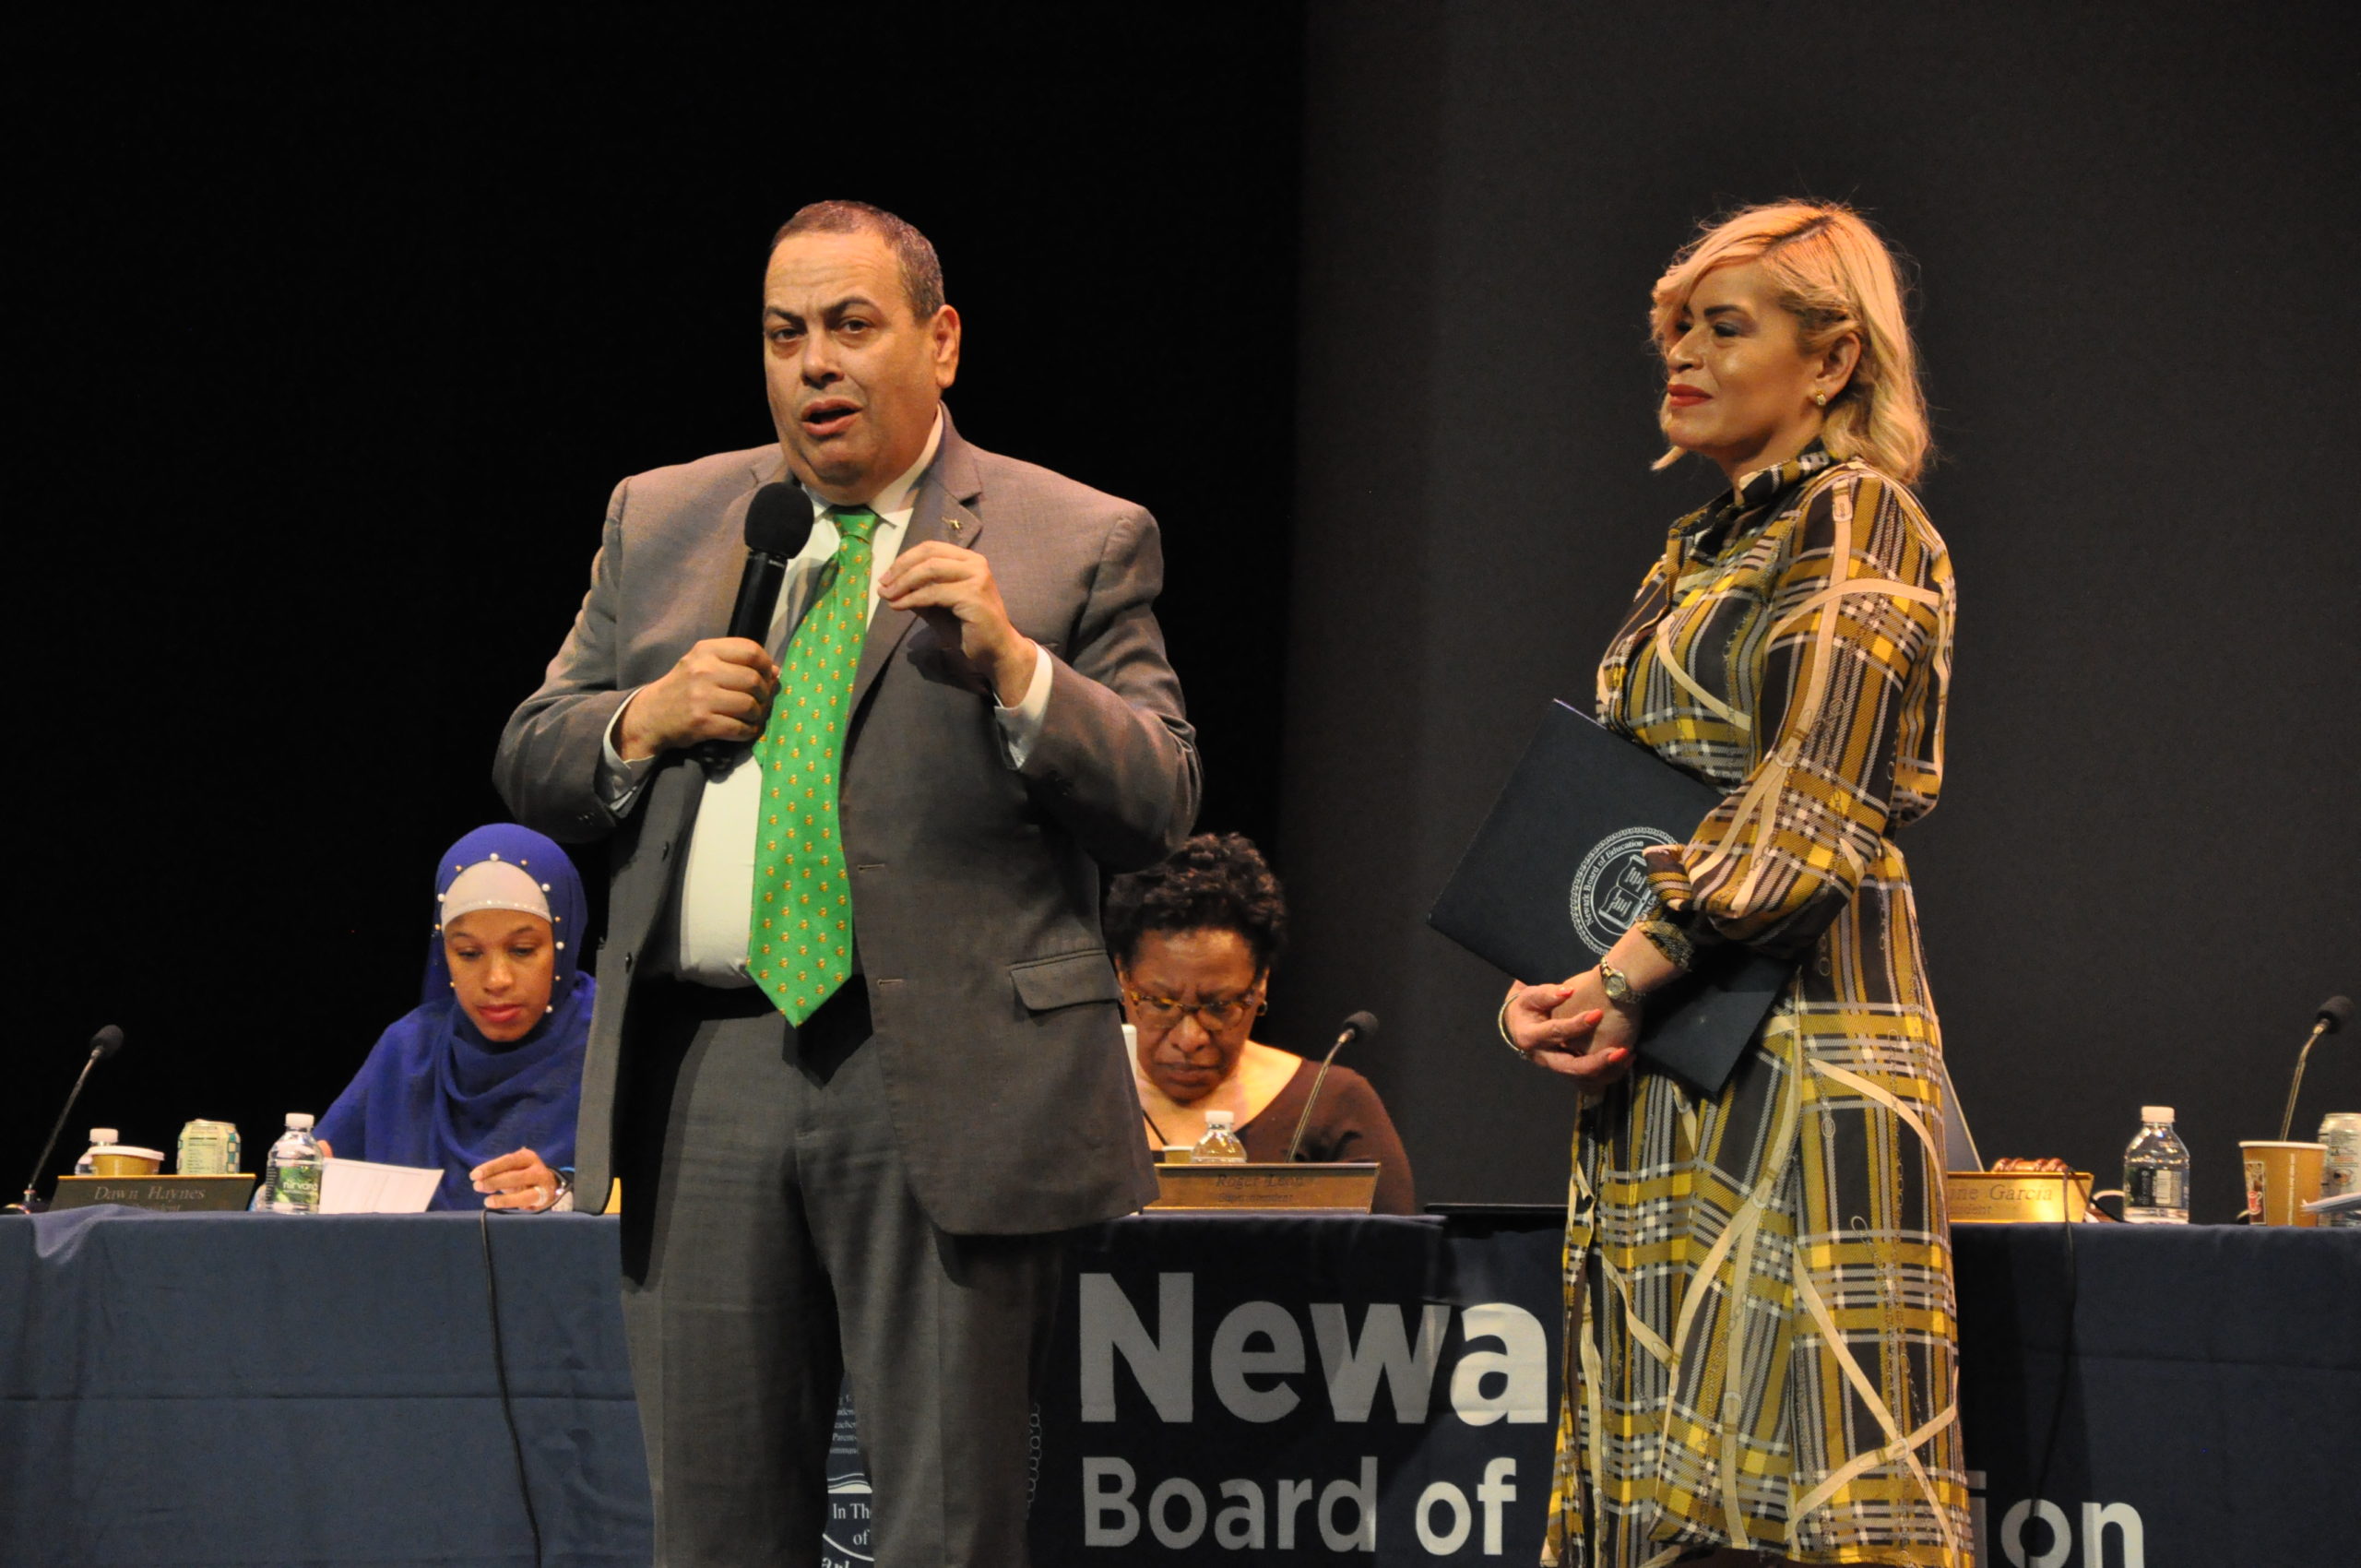 Newark Superintendent Roger León with school board President Josephine Garcia in 2019. The board voted unanimously this week to let León take “any and all” necessary actions during the coronavirus crisis.